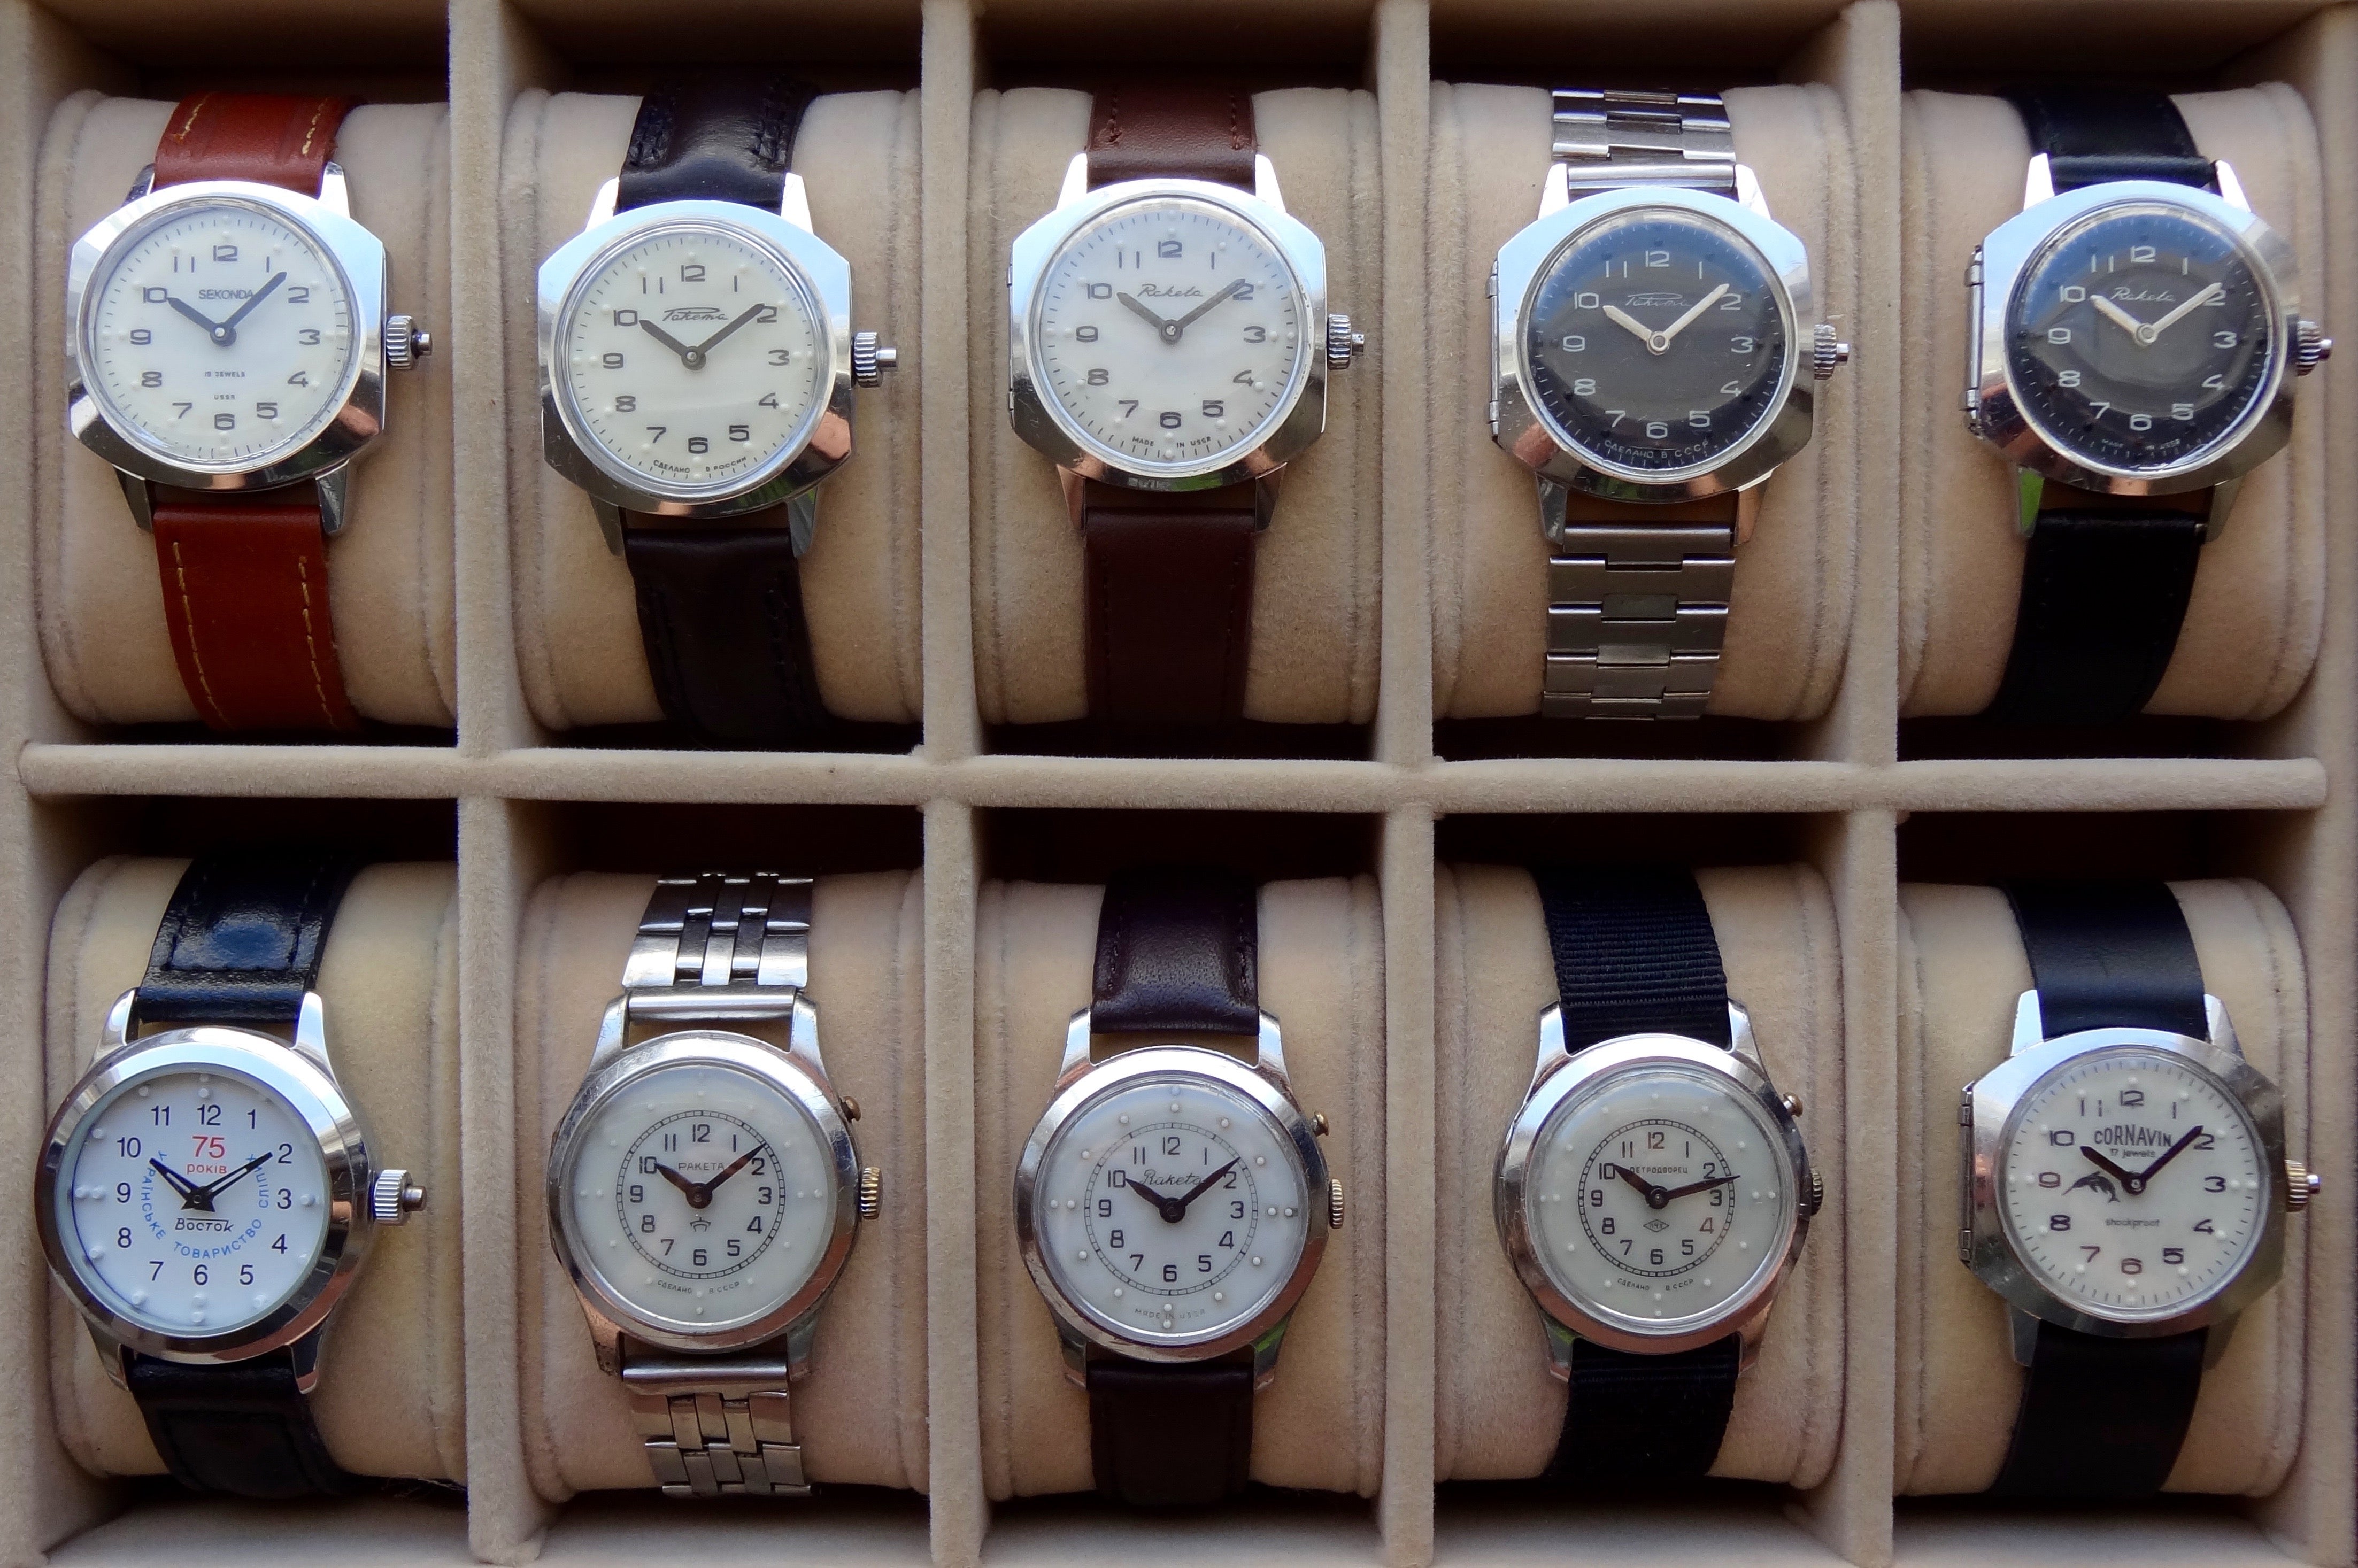 Braille Watches for the Visually Impaired | WatchUSeek Watch Forums